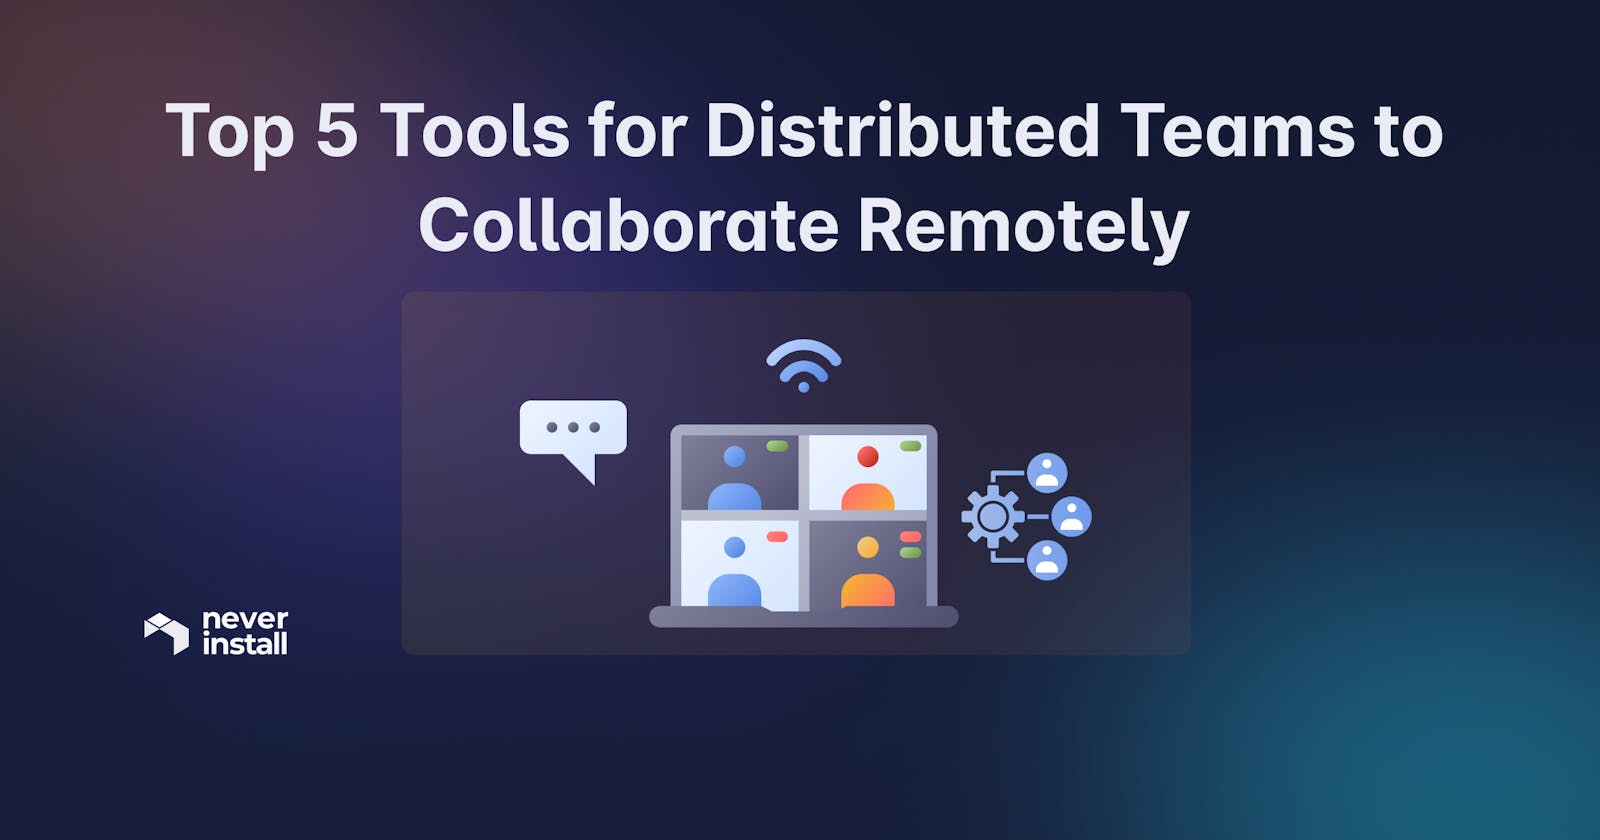 Top 5 Tools for Distributed Teams to Collaborate Remotely in 2022